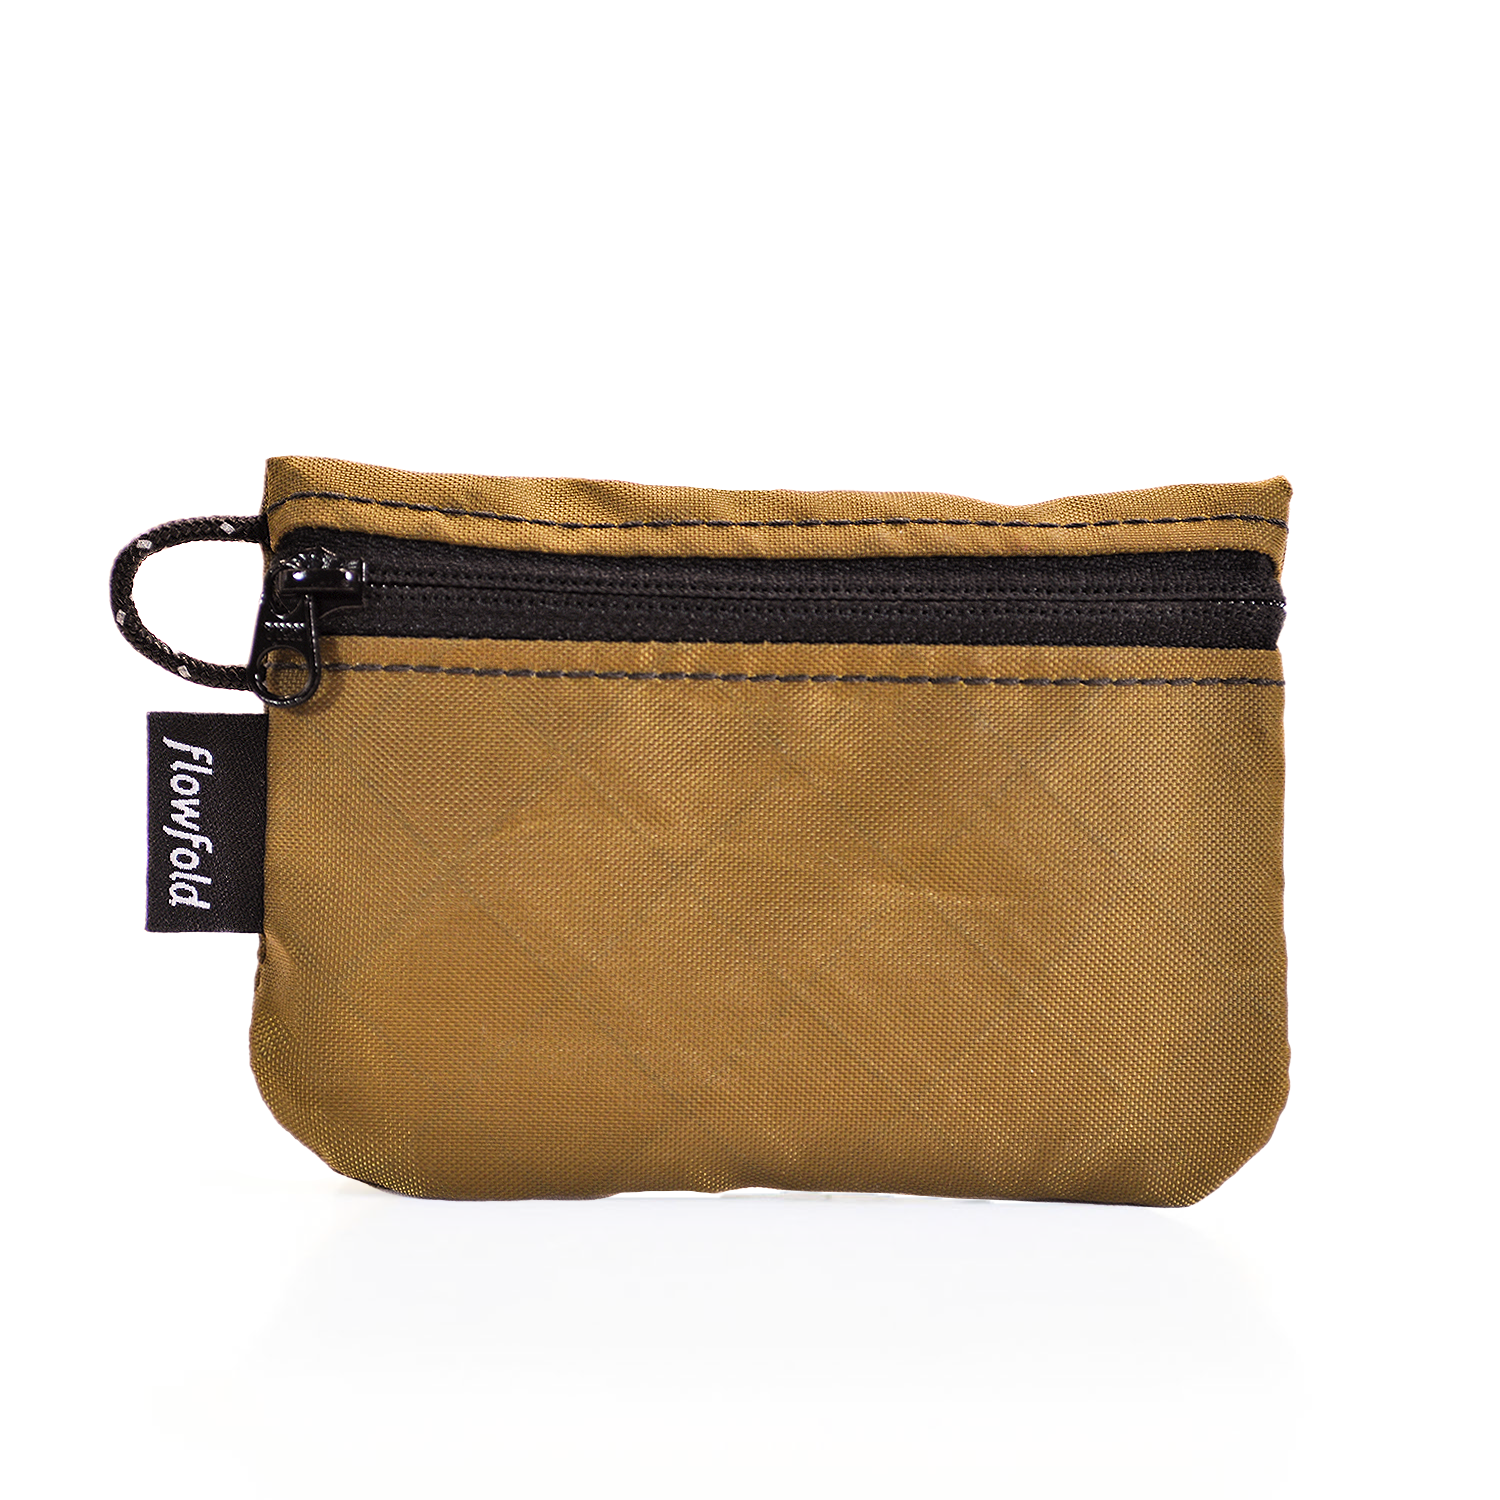 Flowfold Coyote Brown Essentialist Coin Pouch Wallet For Cash, Cards, and Airpods Made in USA, Maine by Flowfold